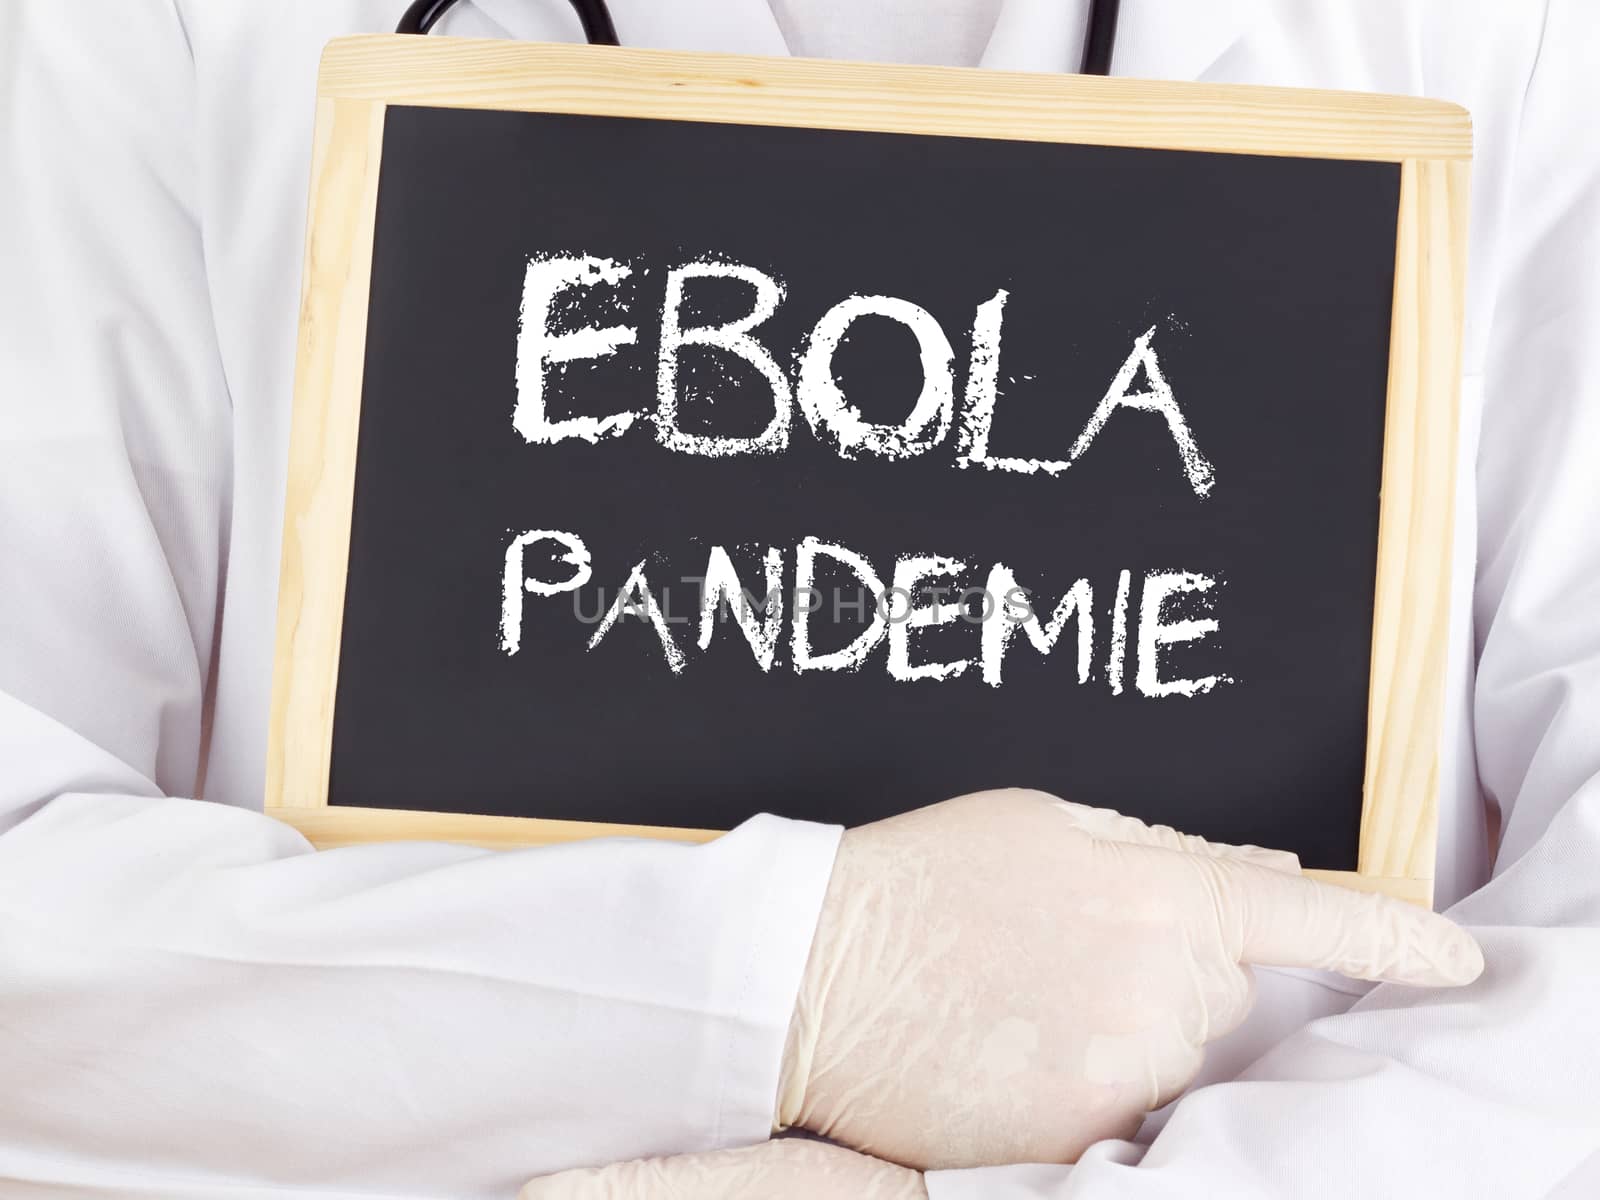 Doctor shows information: Ebola pandemia in german